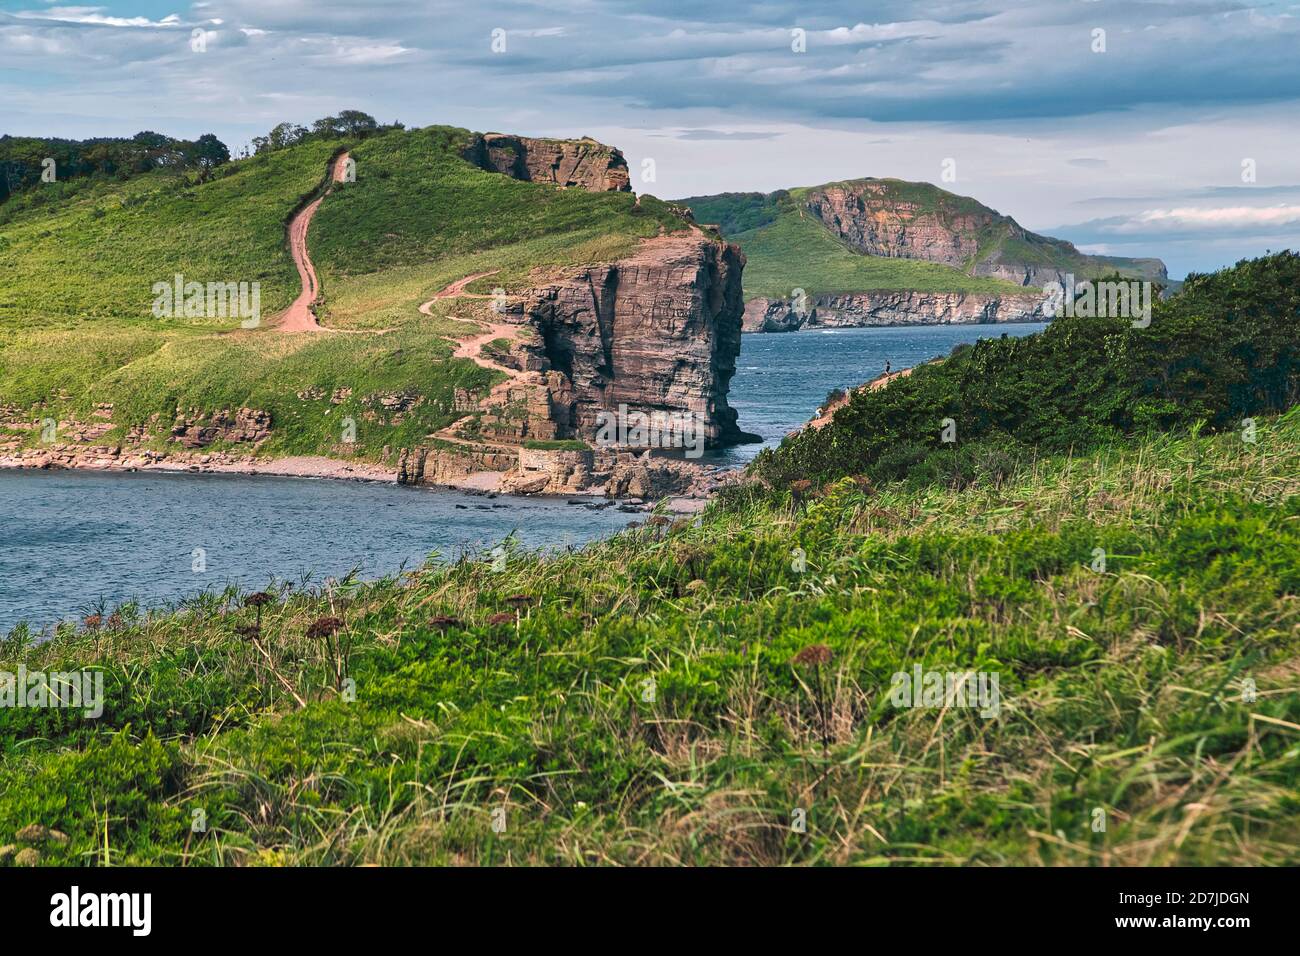 Surface level of grass on russky island at Vladivostok, Russia Stock Photo